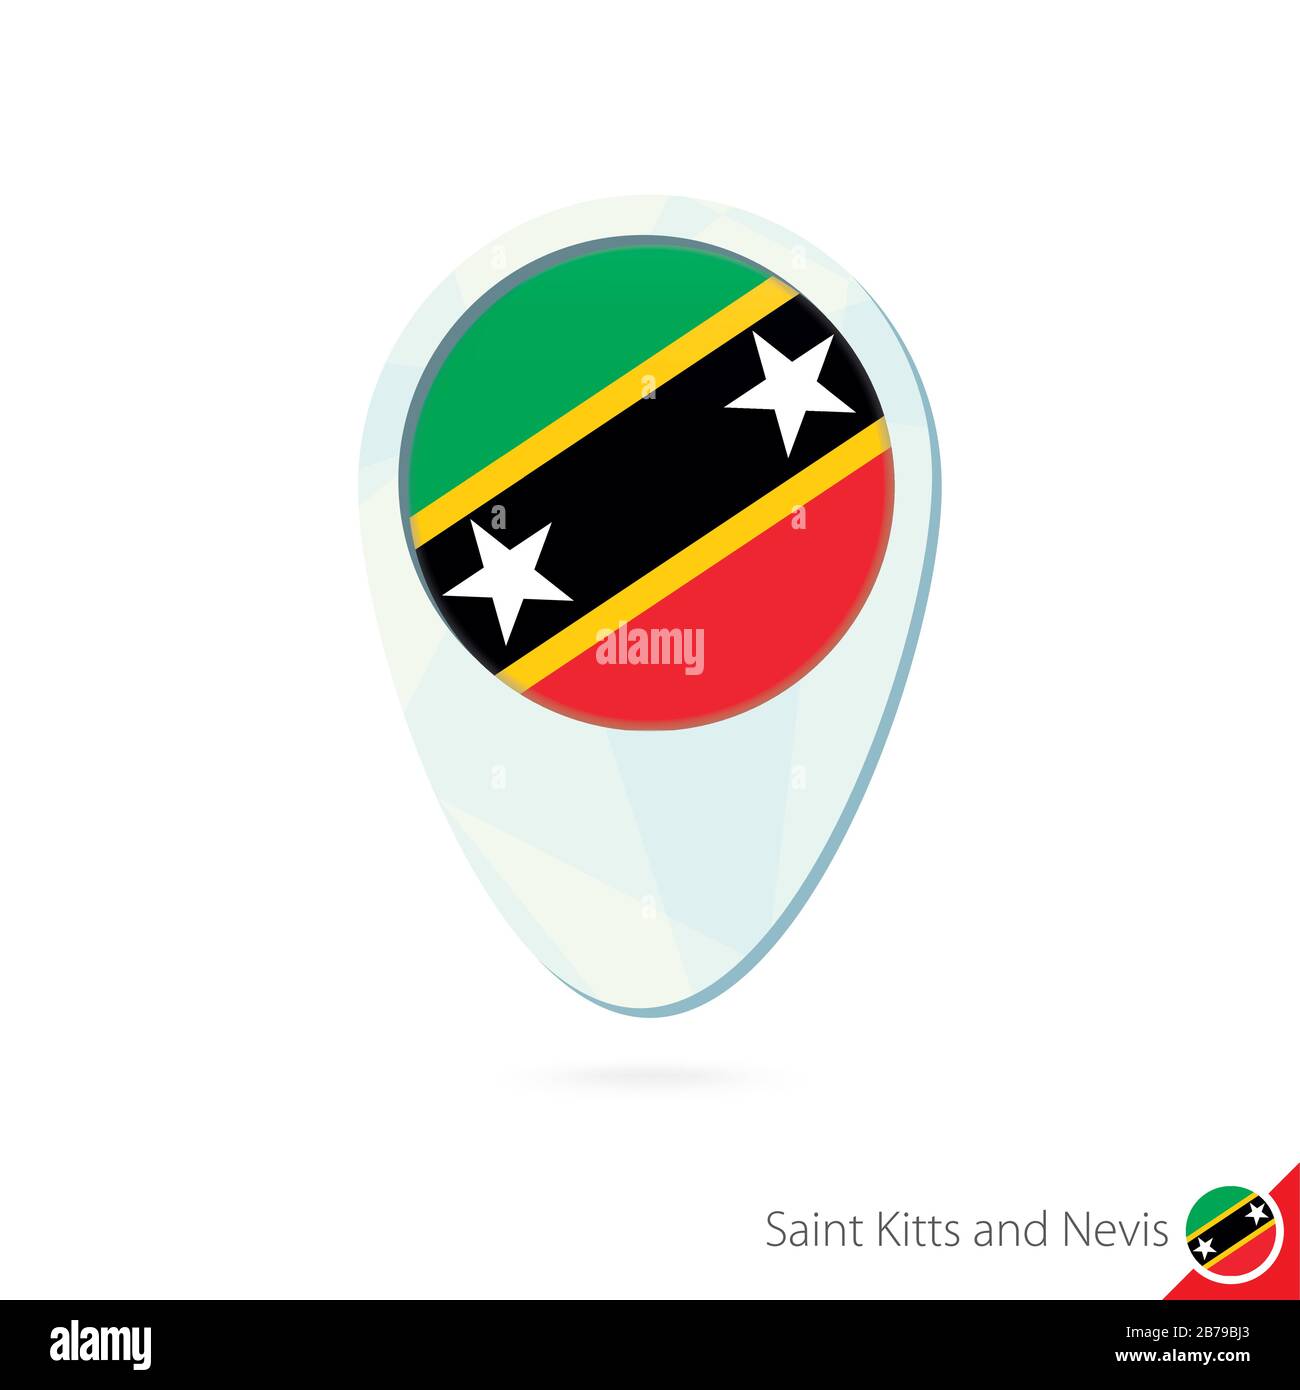 Saint Kitts And Nevis Flag Location Map Pin Icon On White Background Vector Illustration Stock